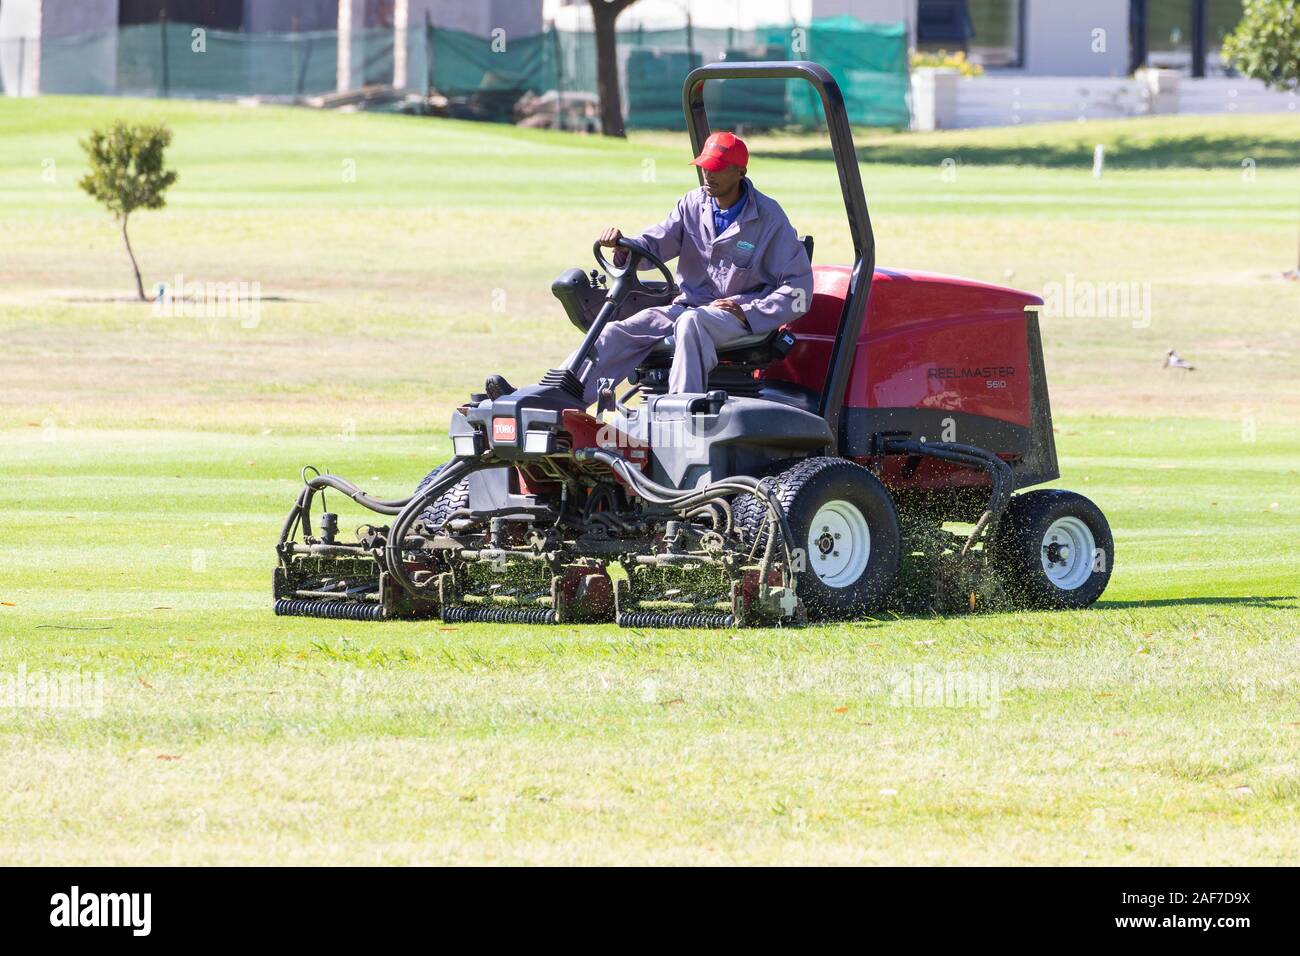 Fairway and turf maintence on a golf course with a Toro Reelmaster 5610  mower. Worker cutting the grass Stock Photo - Alamy